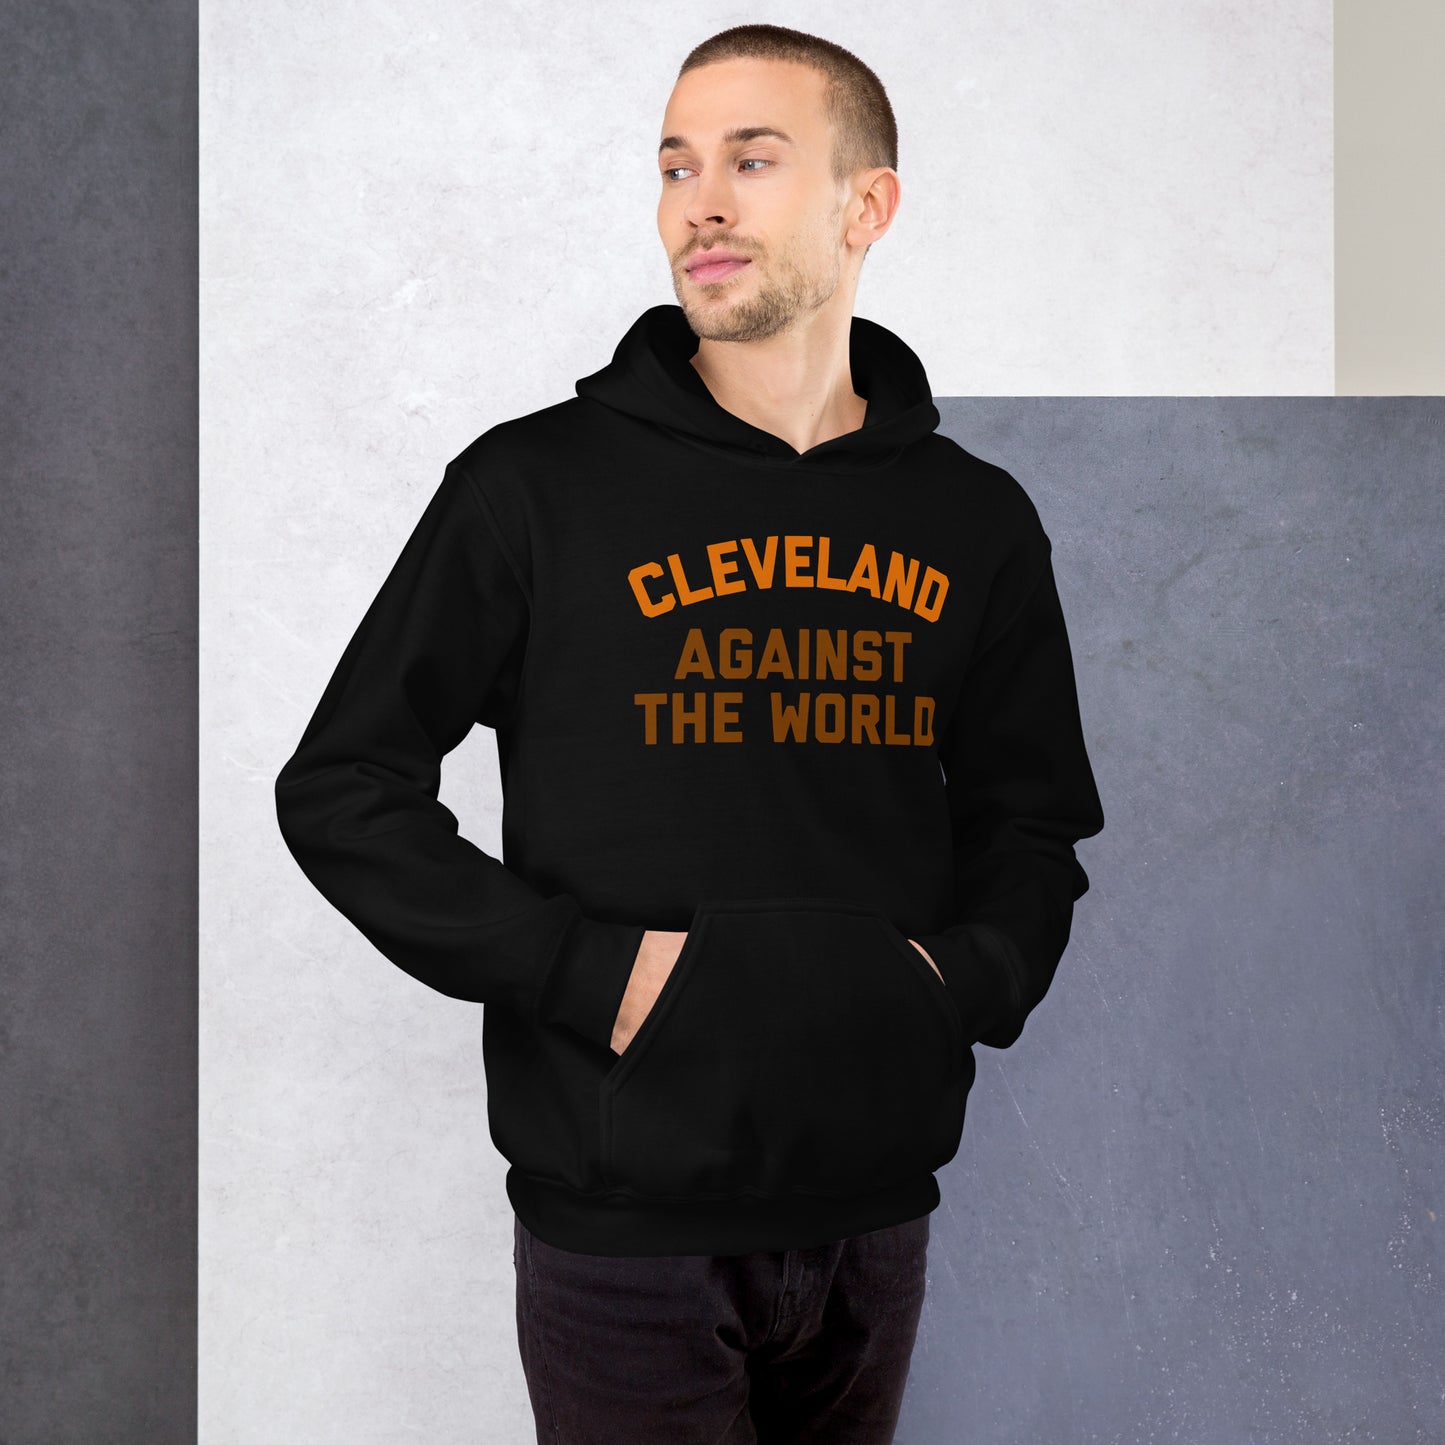 Cleveland Against the World Unisex Hoodie